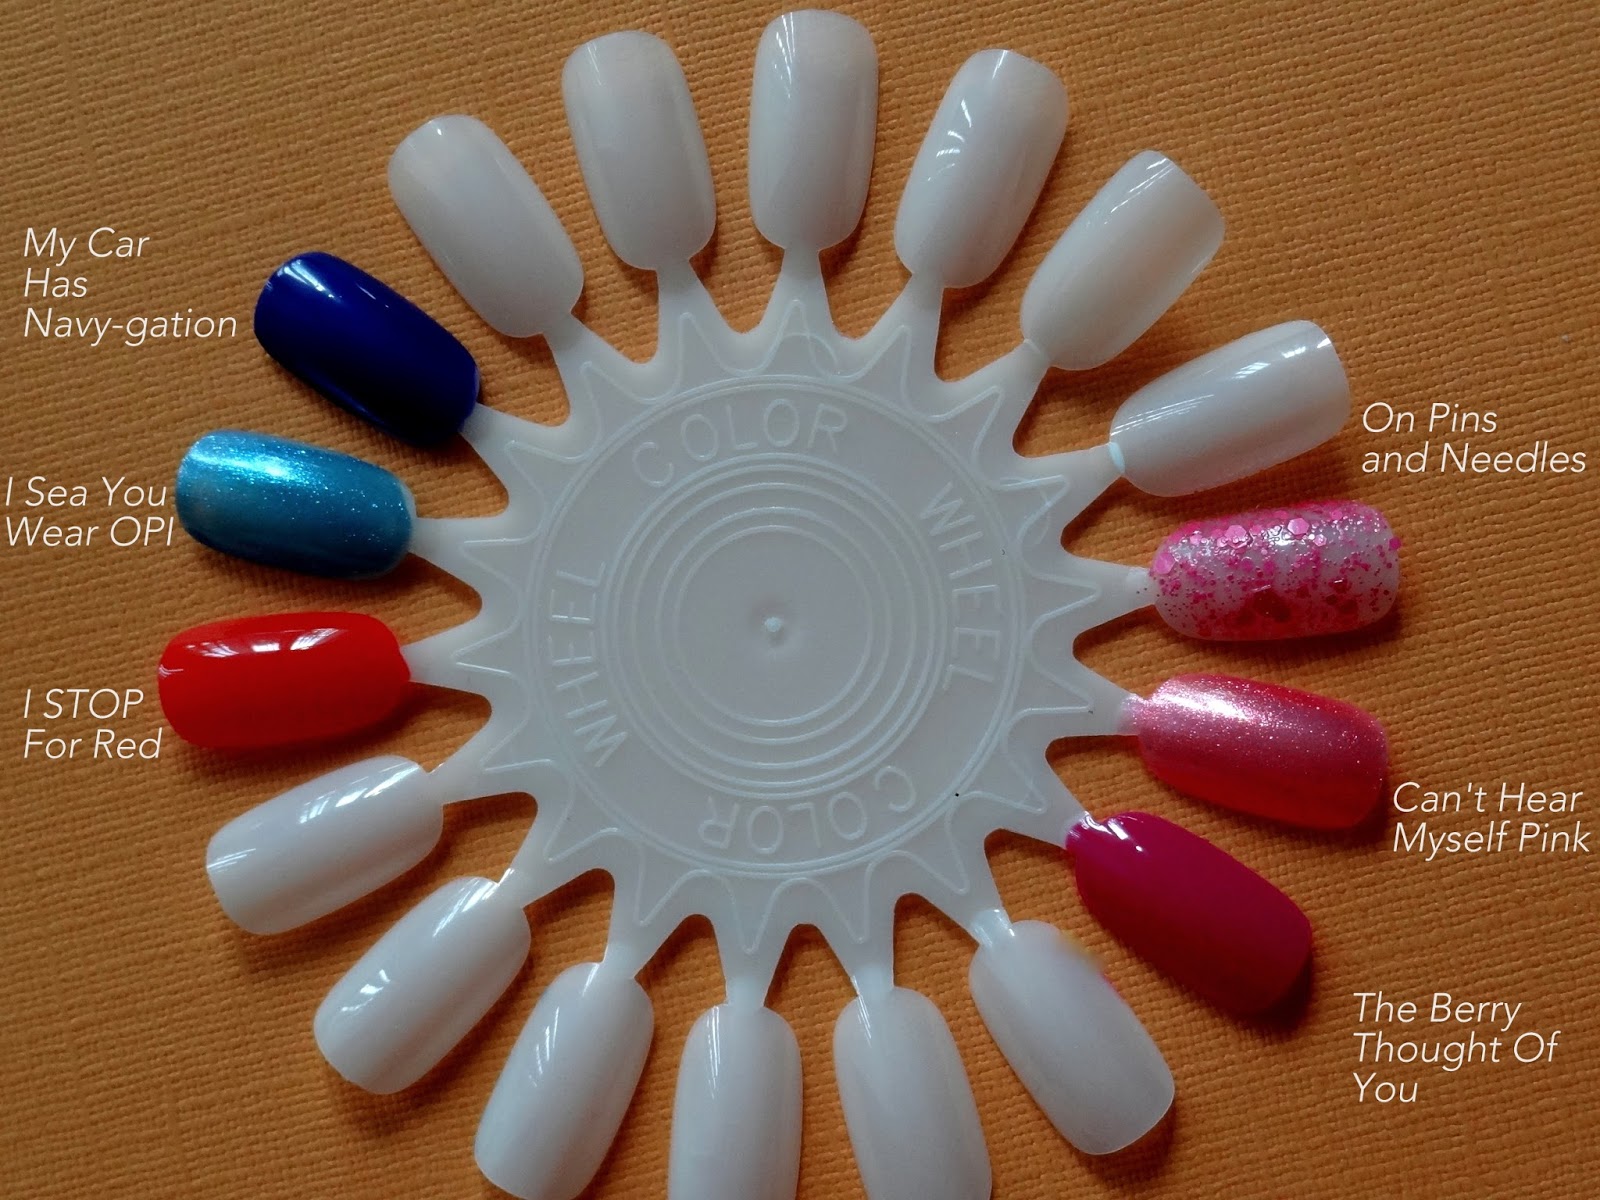 Makeup, Beauty and More: OPI Brights 2015 Collection - Quick Swatches